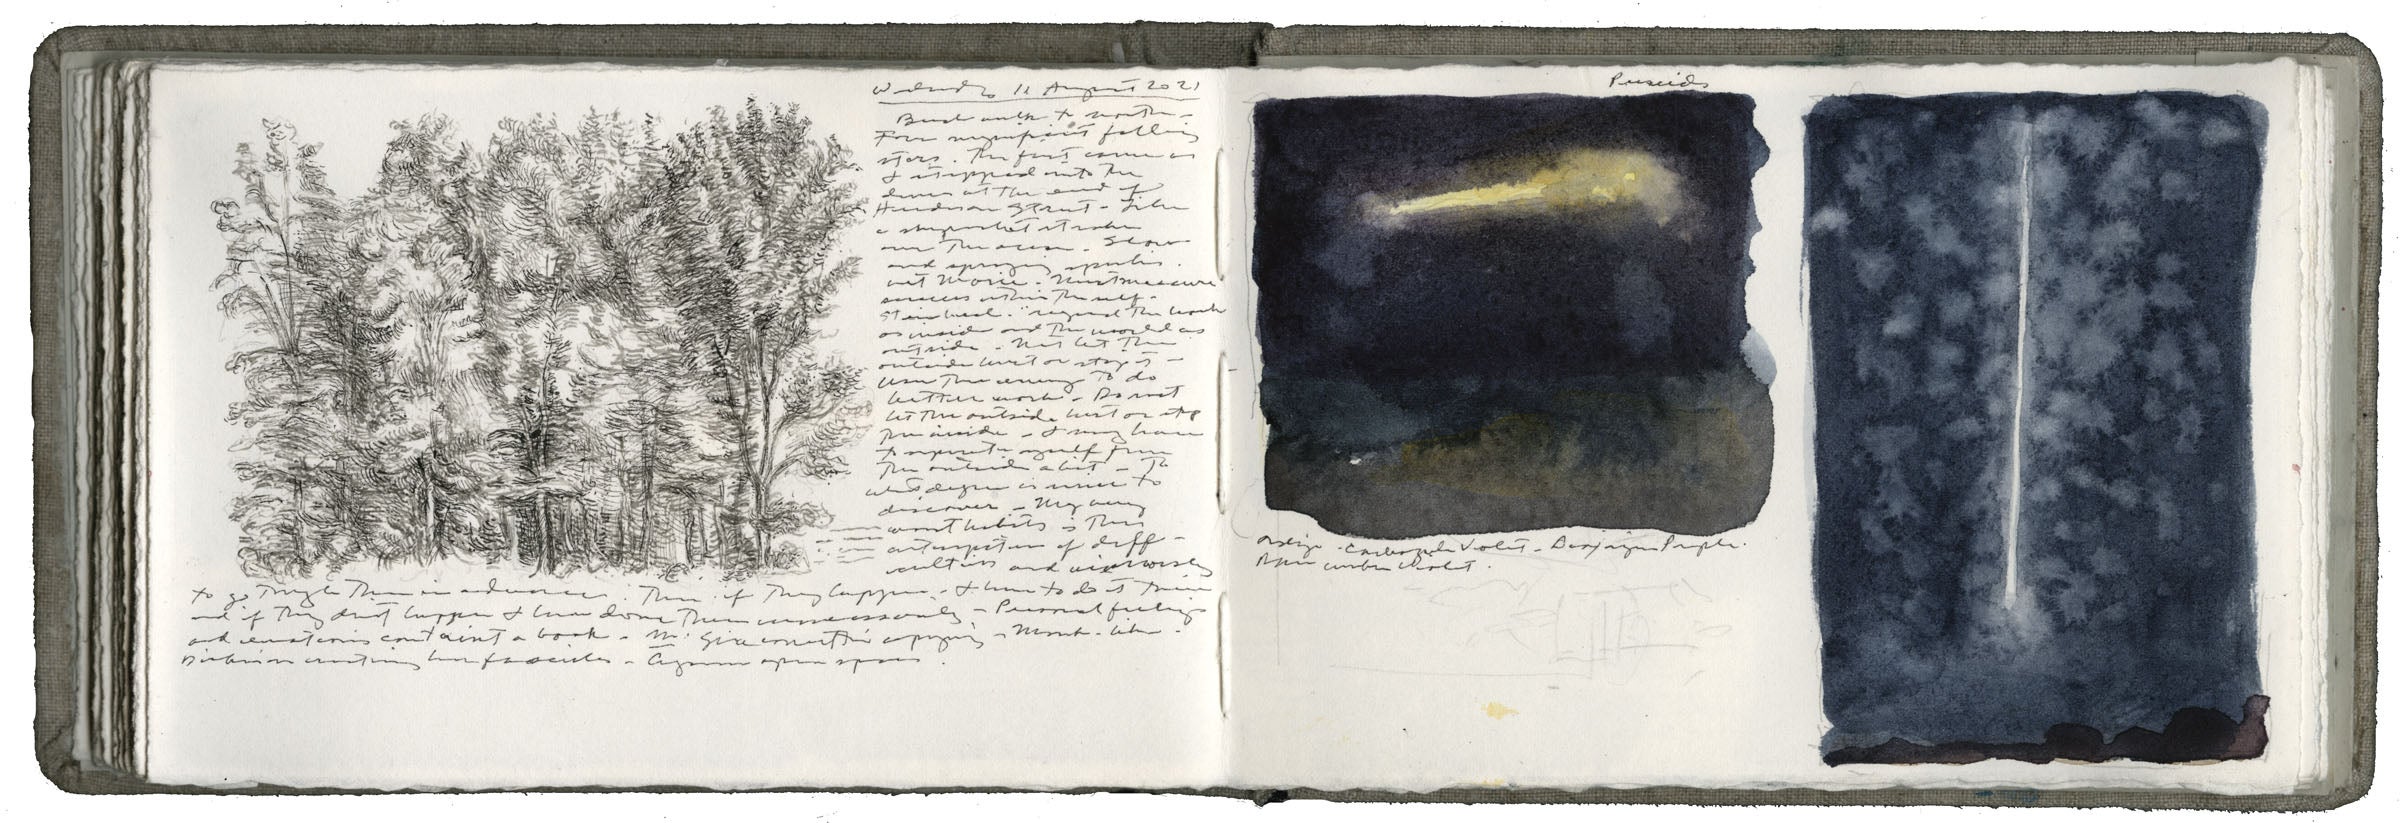 Study after Leonardo and Sketches of Perseid Meteors image